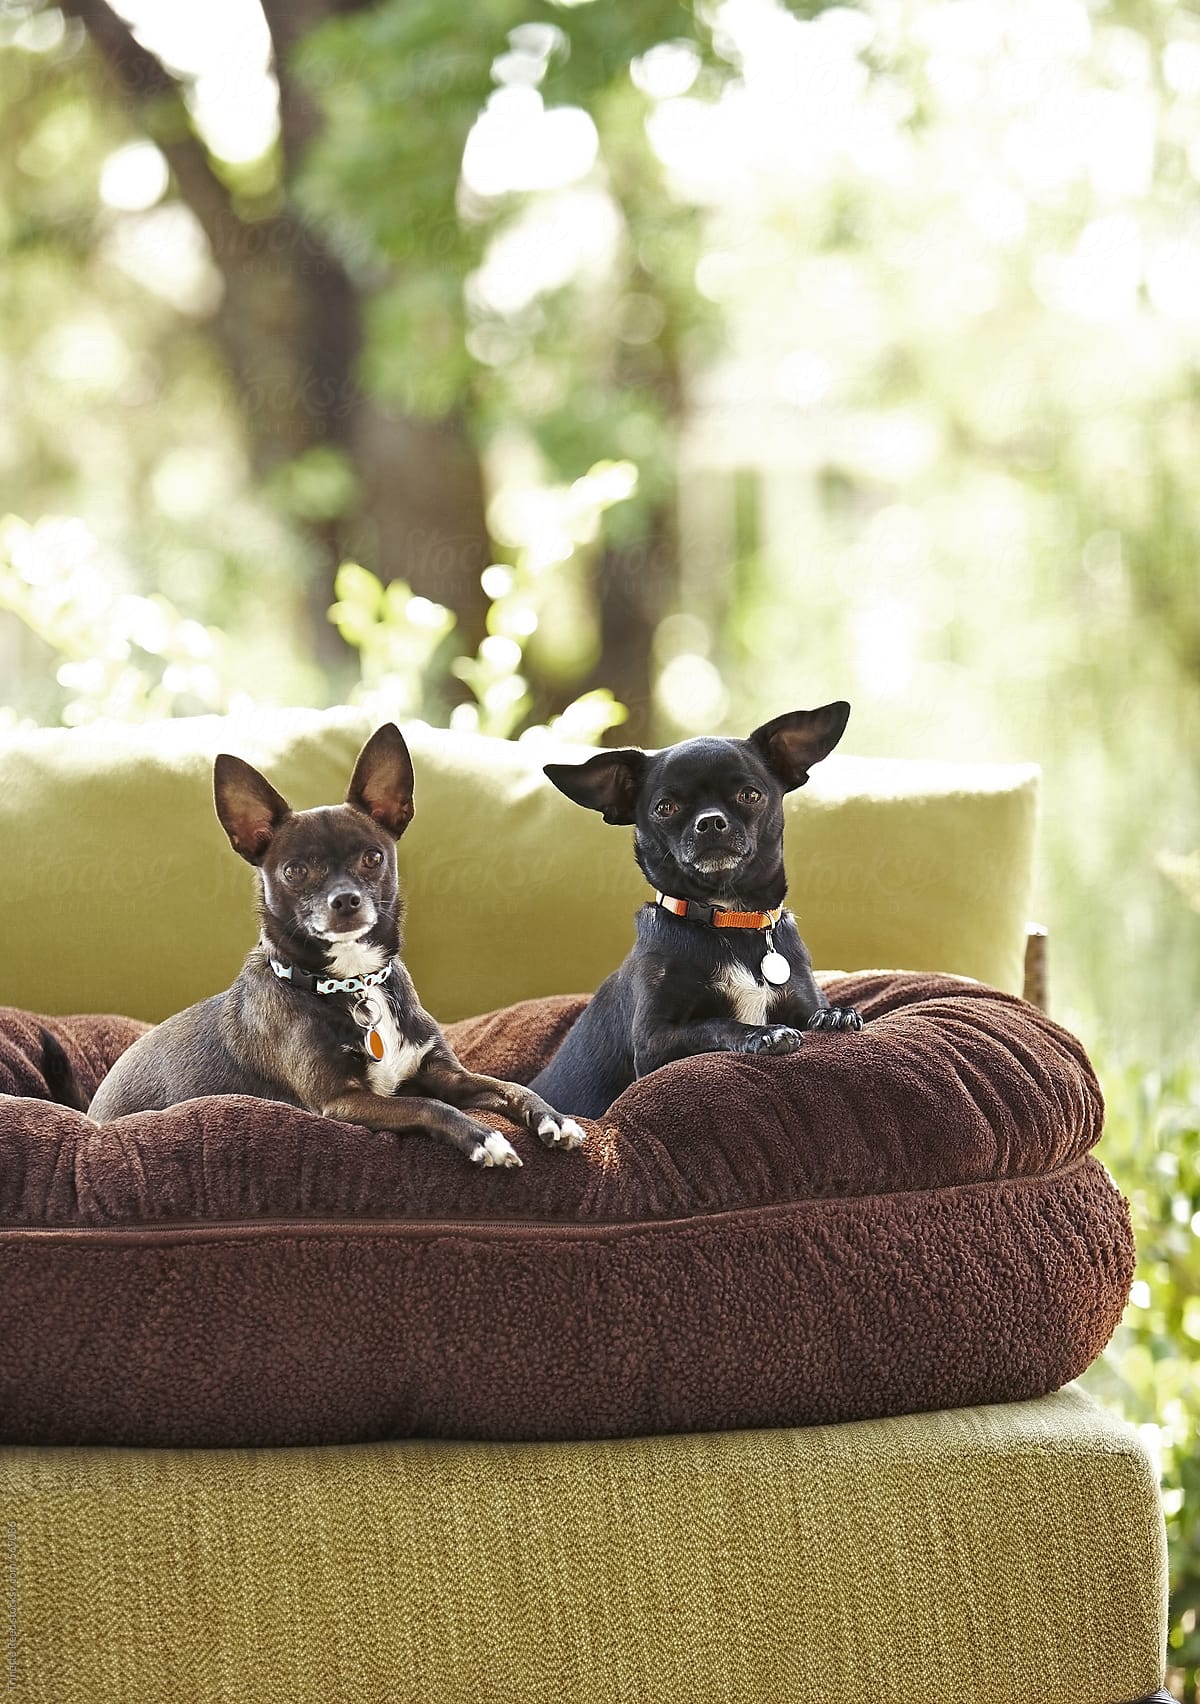 Two Chihuahua pet dogs on pet bed